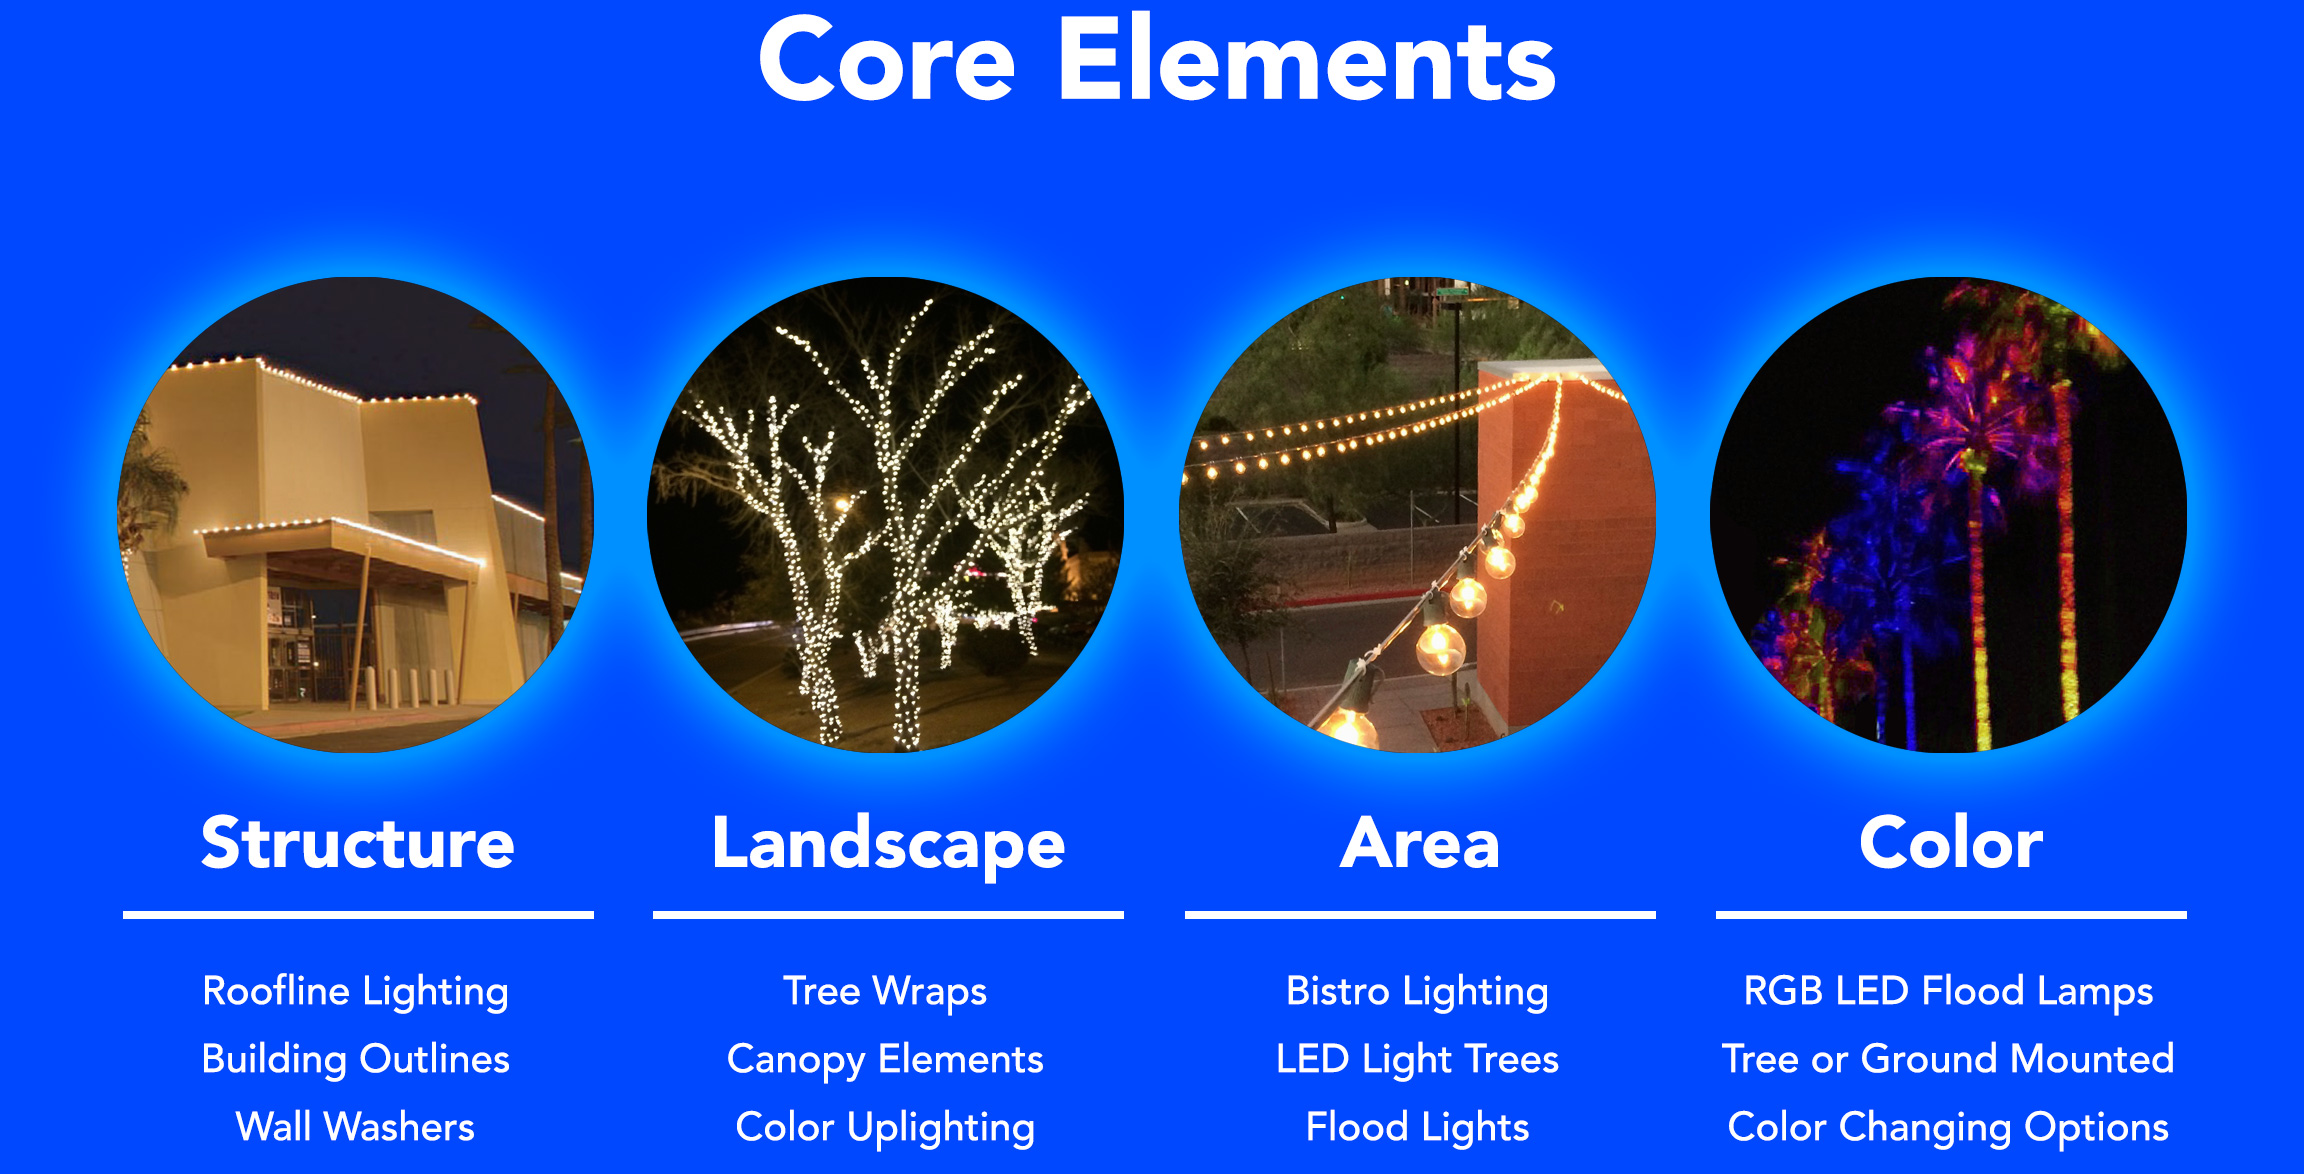 Decorative lighting for Structures, Landscaping, and Areas. Use color to enhance the ambient light and better define your look. Bistro Lights, Roofline Lighting, Color Washers, Tree Wraps, Canopy Lighting, Color Uplighting, RGB LED Flood Lamps, Tree Mounted Lighting, Color Change LED Lights